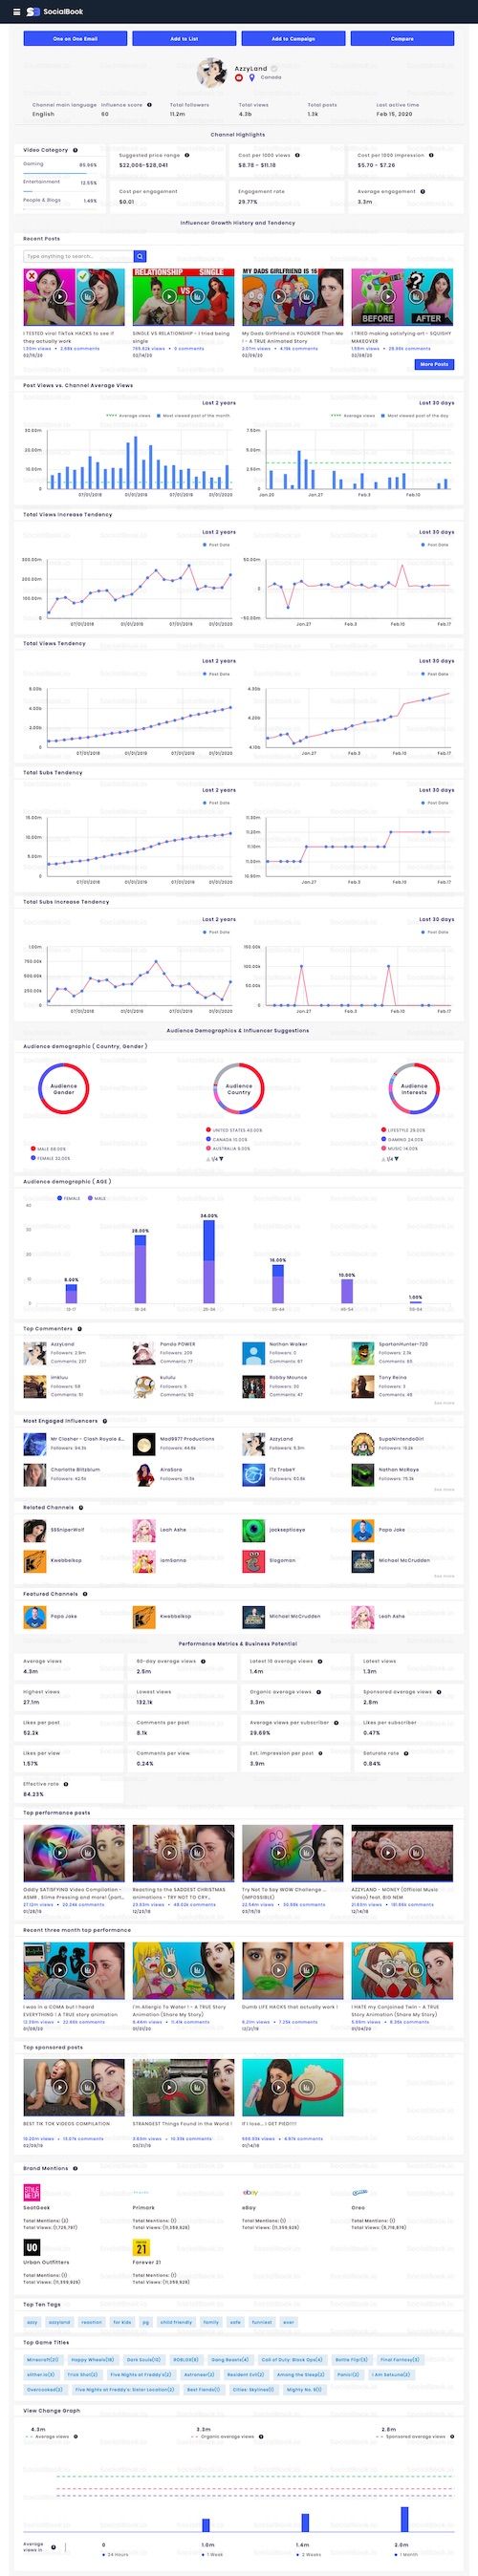 The full YouTube channel profile and analytics report of Azzyland. (Credit: SocialBook.io)